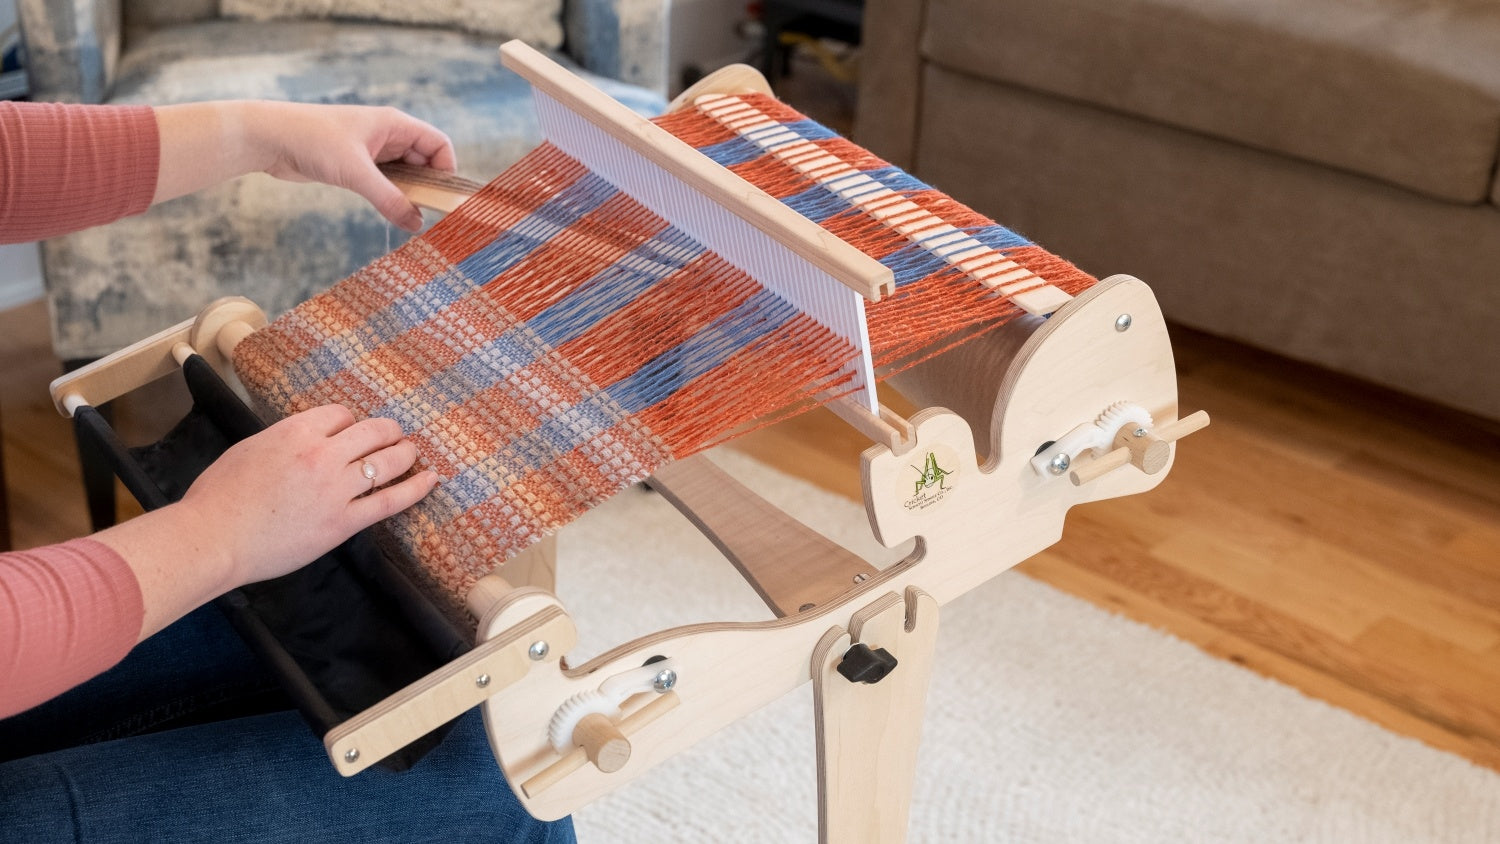 In-Person Course: Beginning Rigid Heddle Weaving